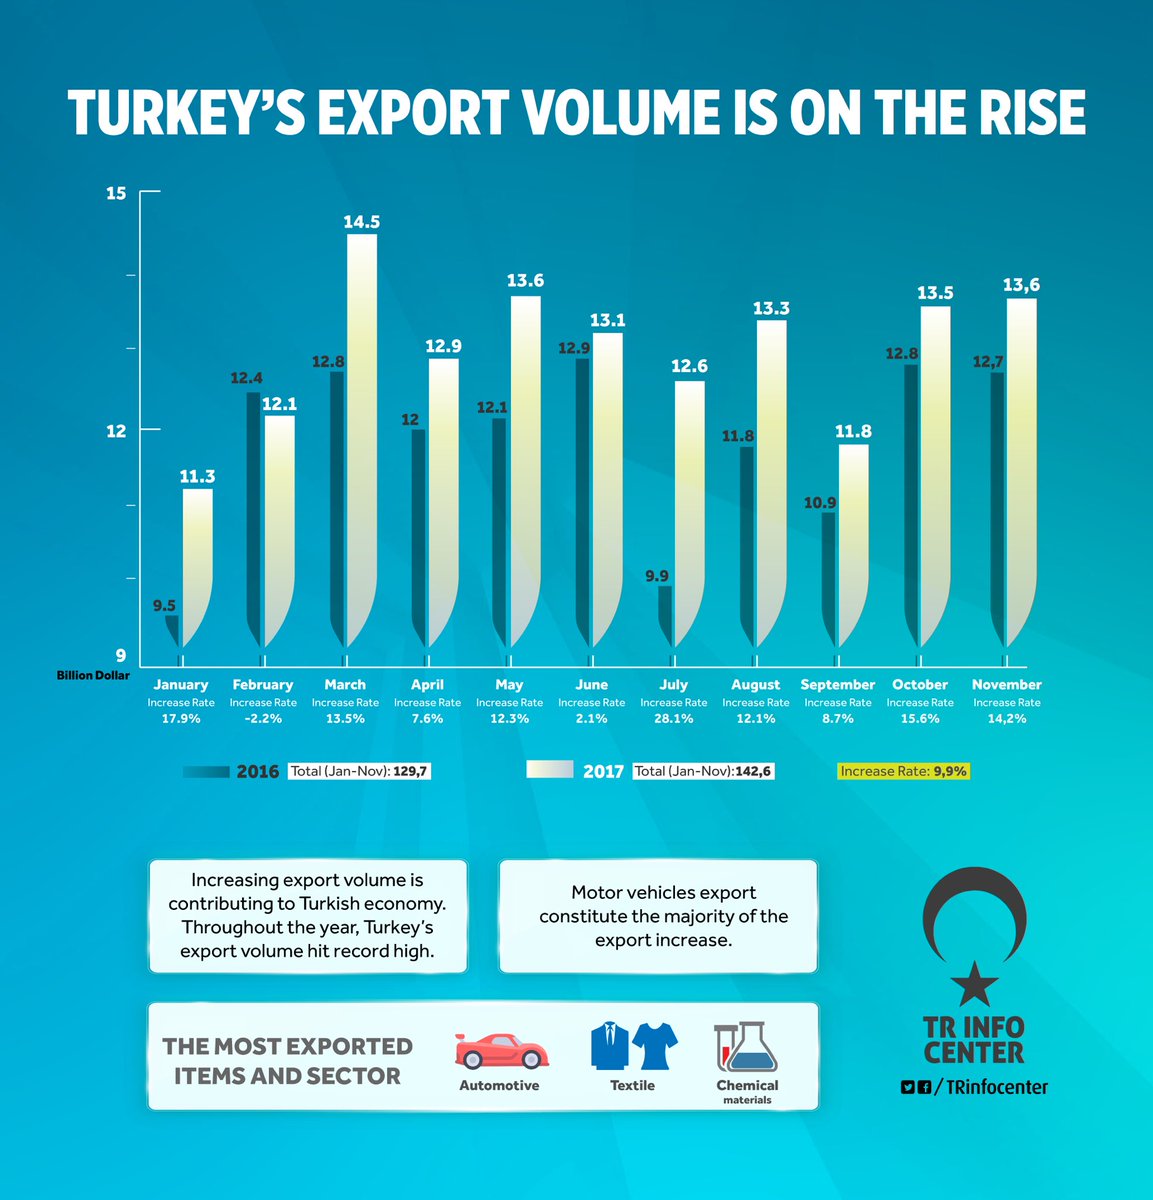 Turkey's export volume is on the rise